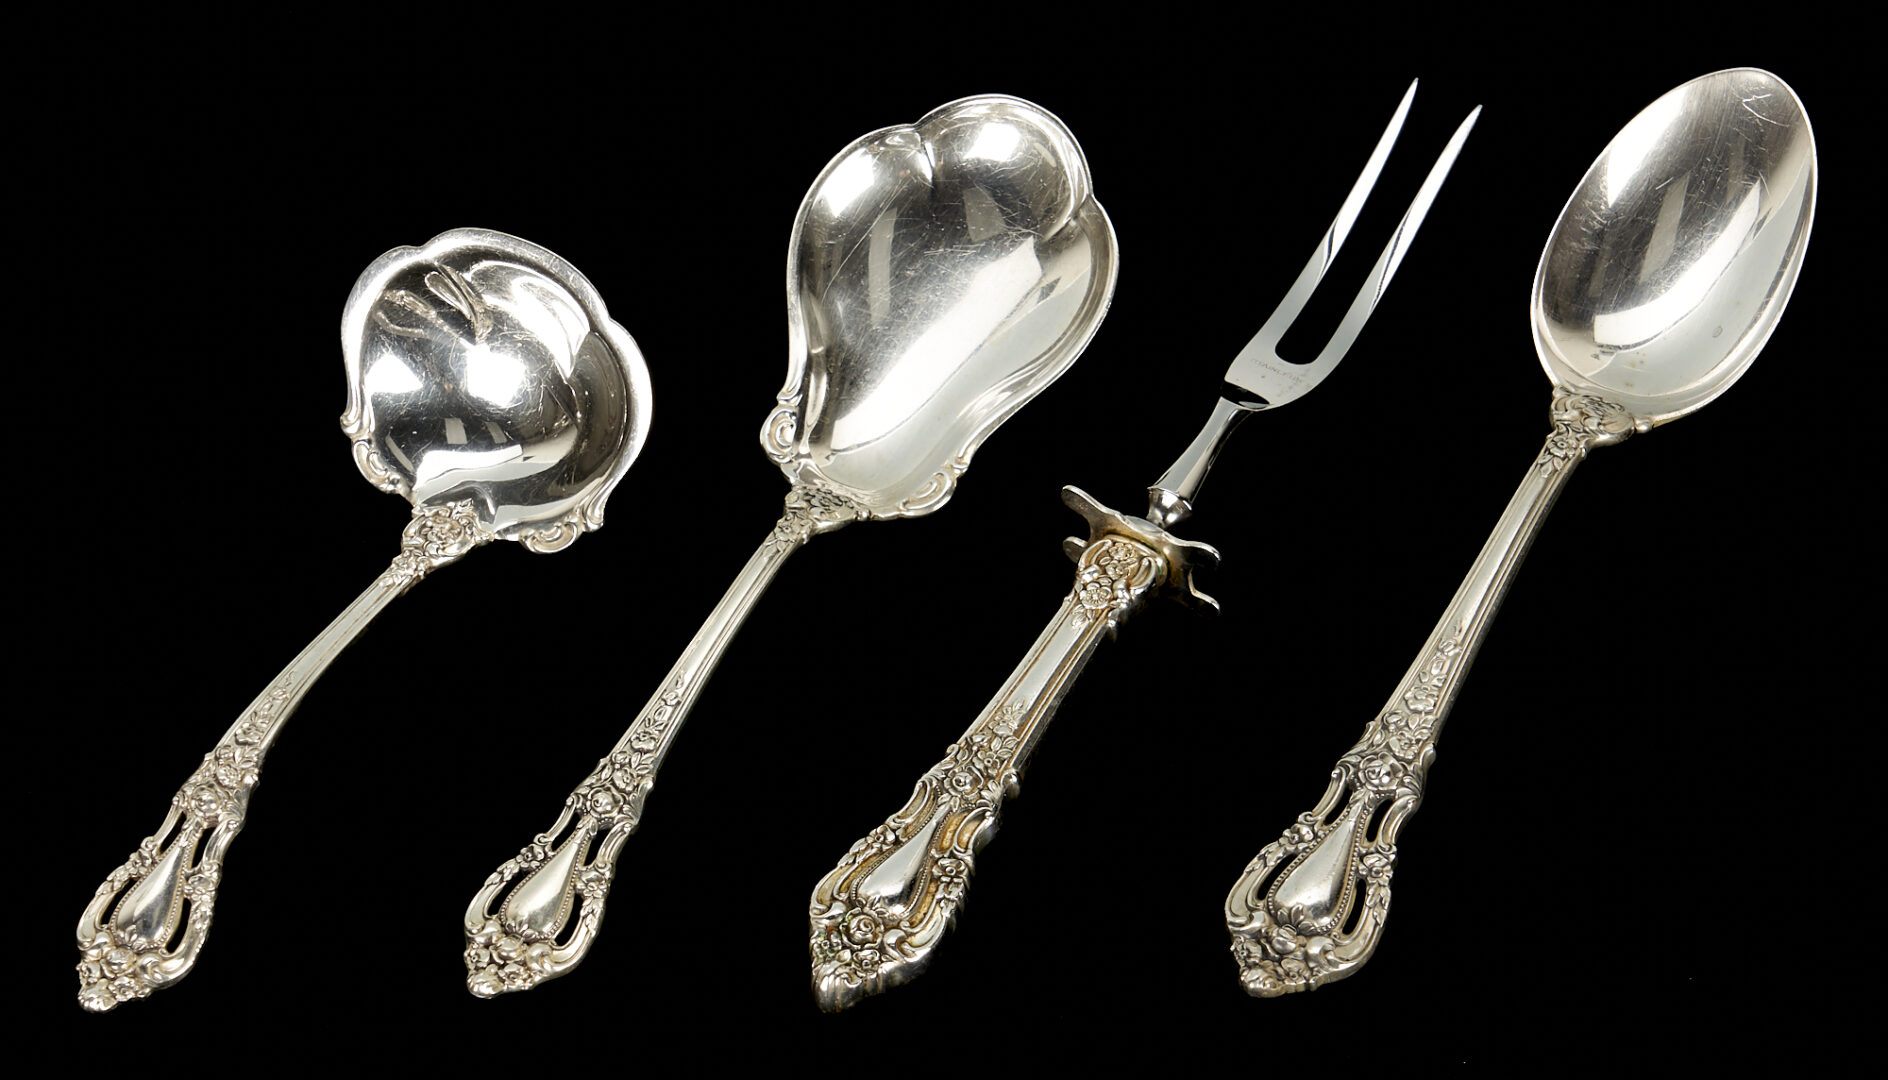 Lot 242: 115 pcs. Lunt Eloquence Sterling Silver Flatware Set, Service for 12